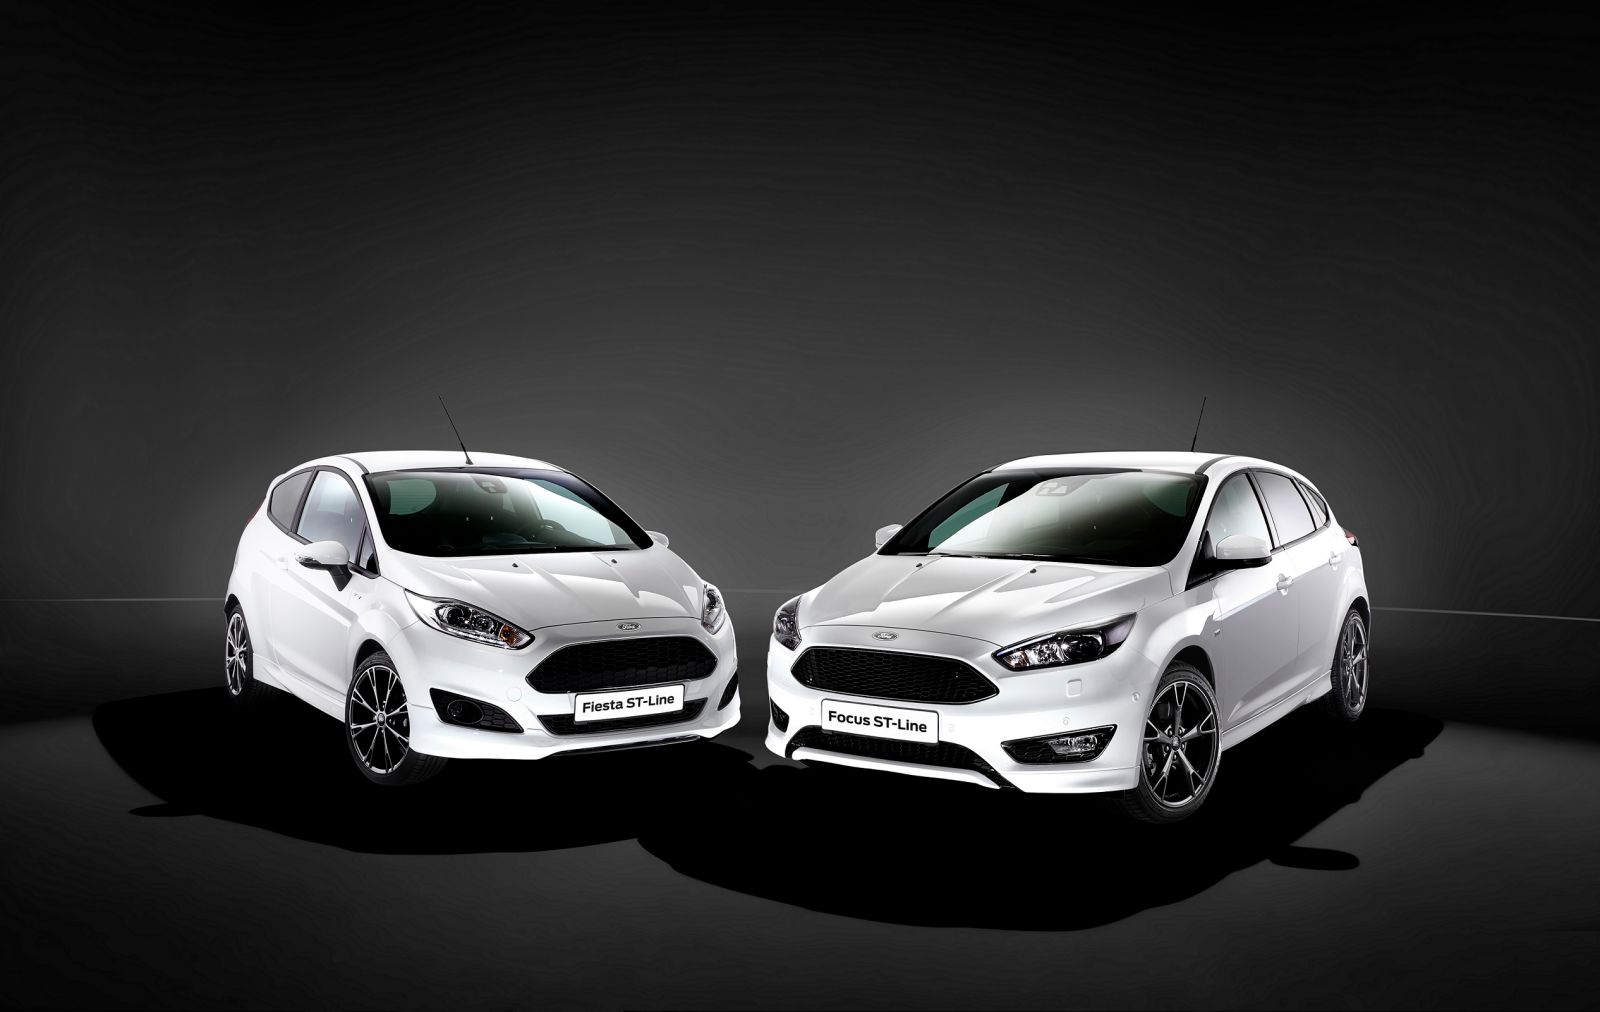 Introduction of the ST-Line models, Ford’s sporty appearance trim level, sorta replacing the Zetec S models. Nearly every European Ford has had this since, and it started being introduced worldwide from 2019. I won’t be listing the rest of the ST-Line models here, this list is long enough already.